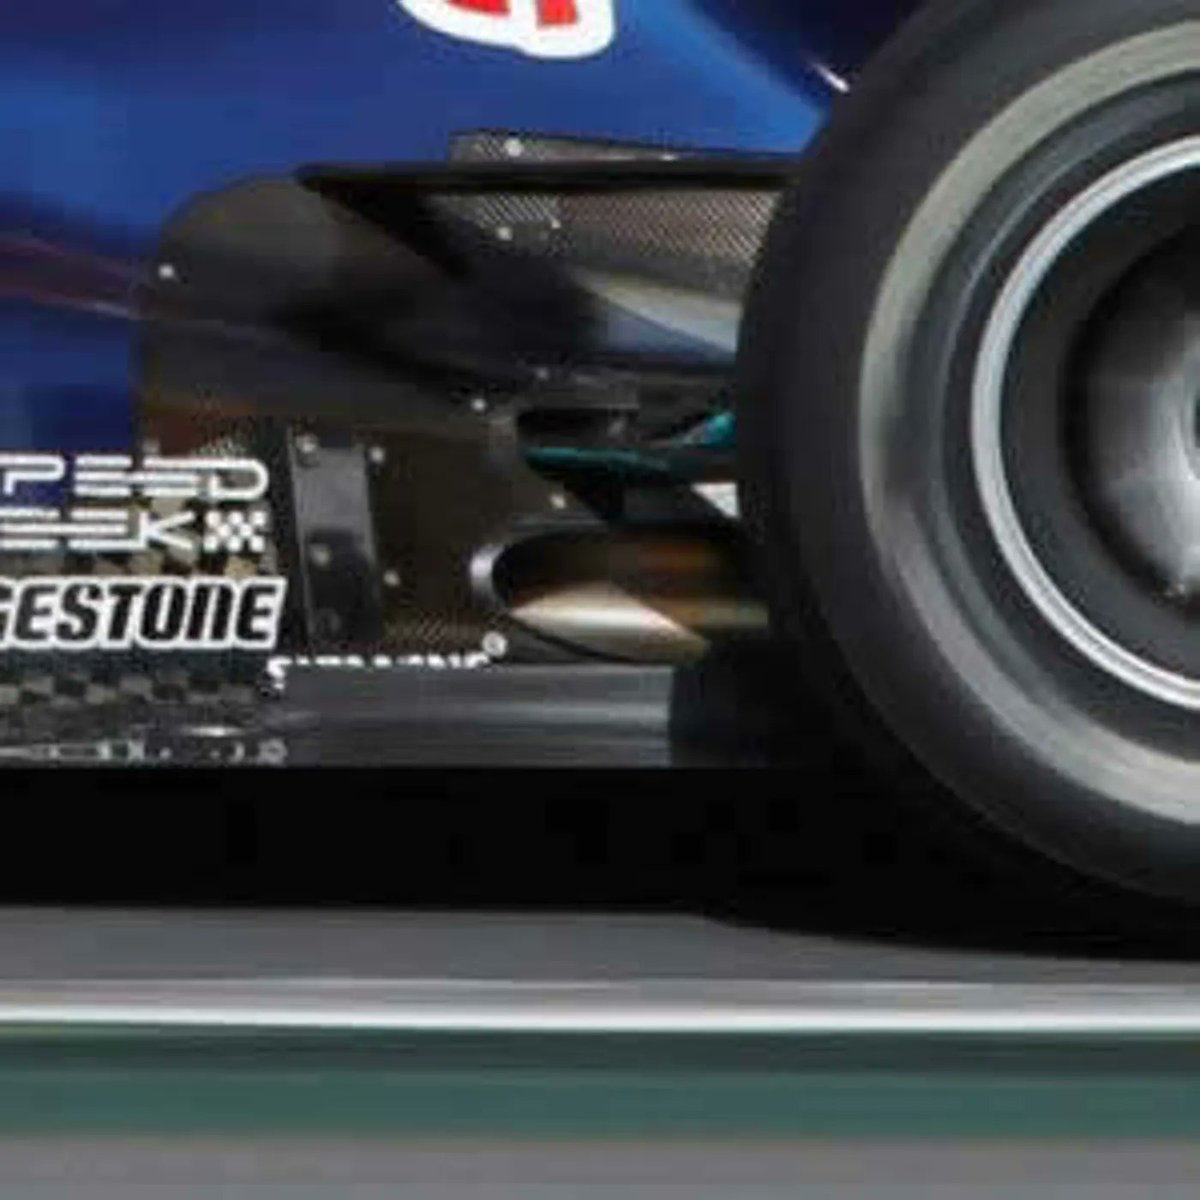 It was Newey now at Red Bull that reintroduced the blown diffuser in 2010. Routing the exhaust out the edge of the sidepod, to initially blow through a hole in the diffuser to increase flow. This was a very powerful solution and was worth the heat put into the rear bodywork.